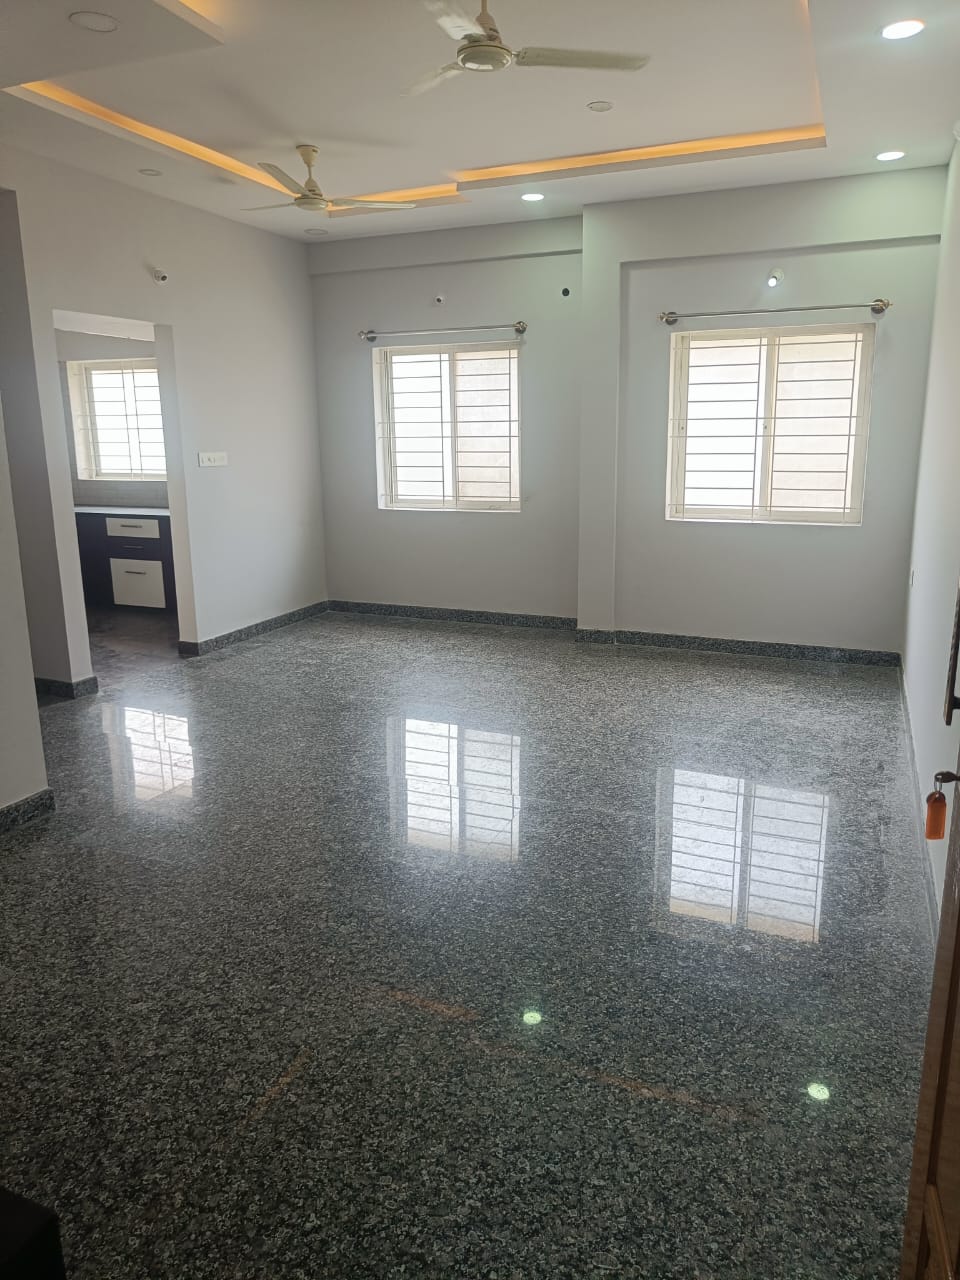 3 BHK Independent House for Lease Only at JAML2 - 4037 in Chandapura